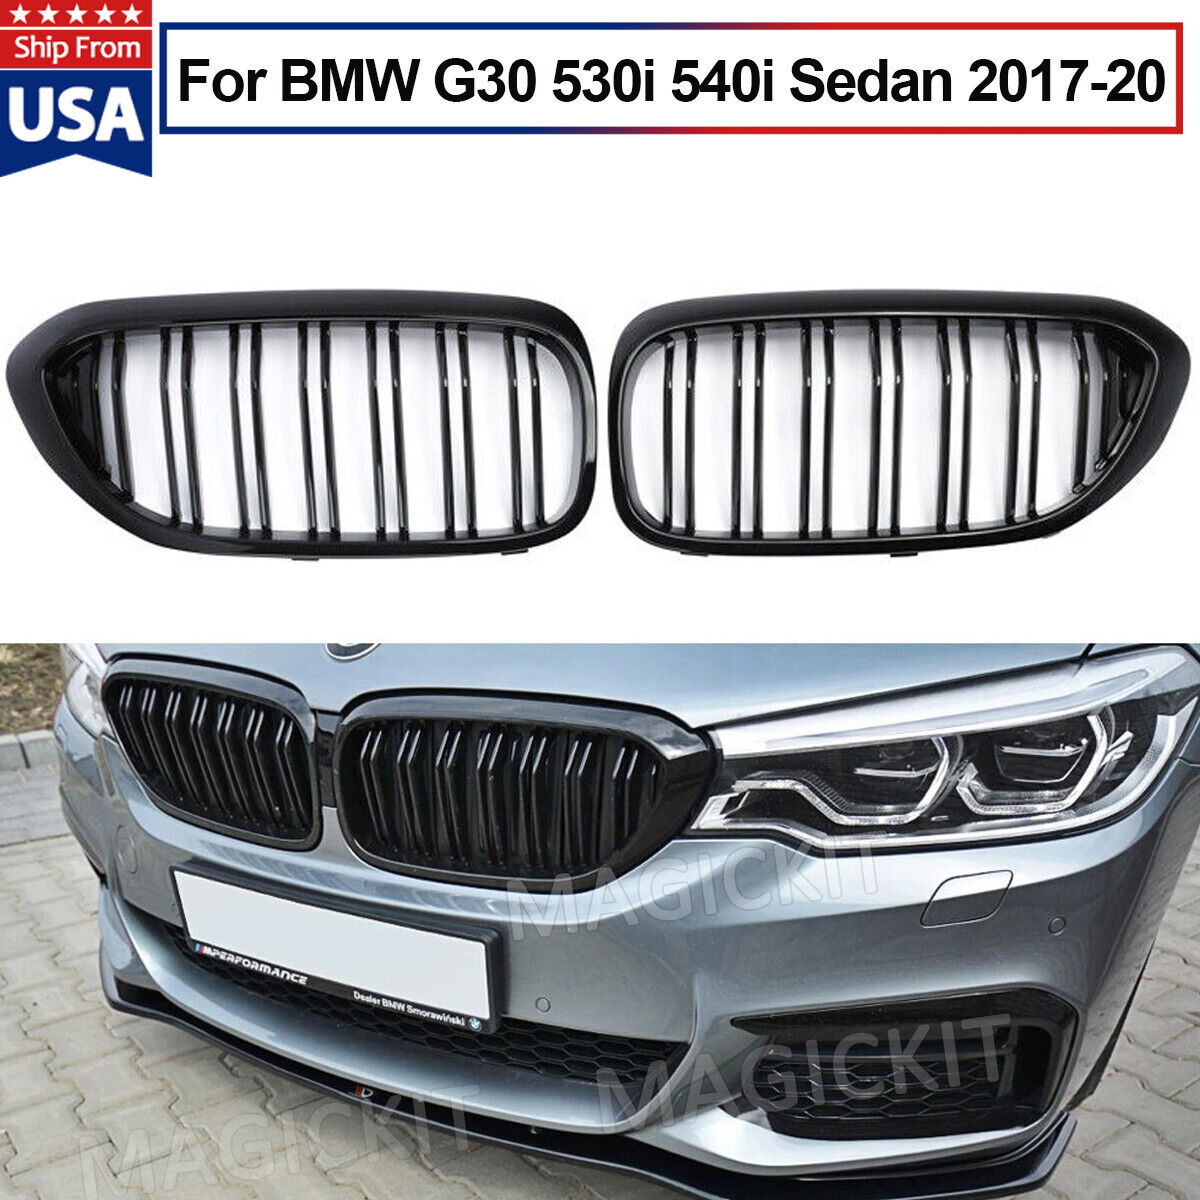 Shiny Black Front Kidney Grille Grill For BMW G30 G31 5-Series 530i 540i 2017-20